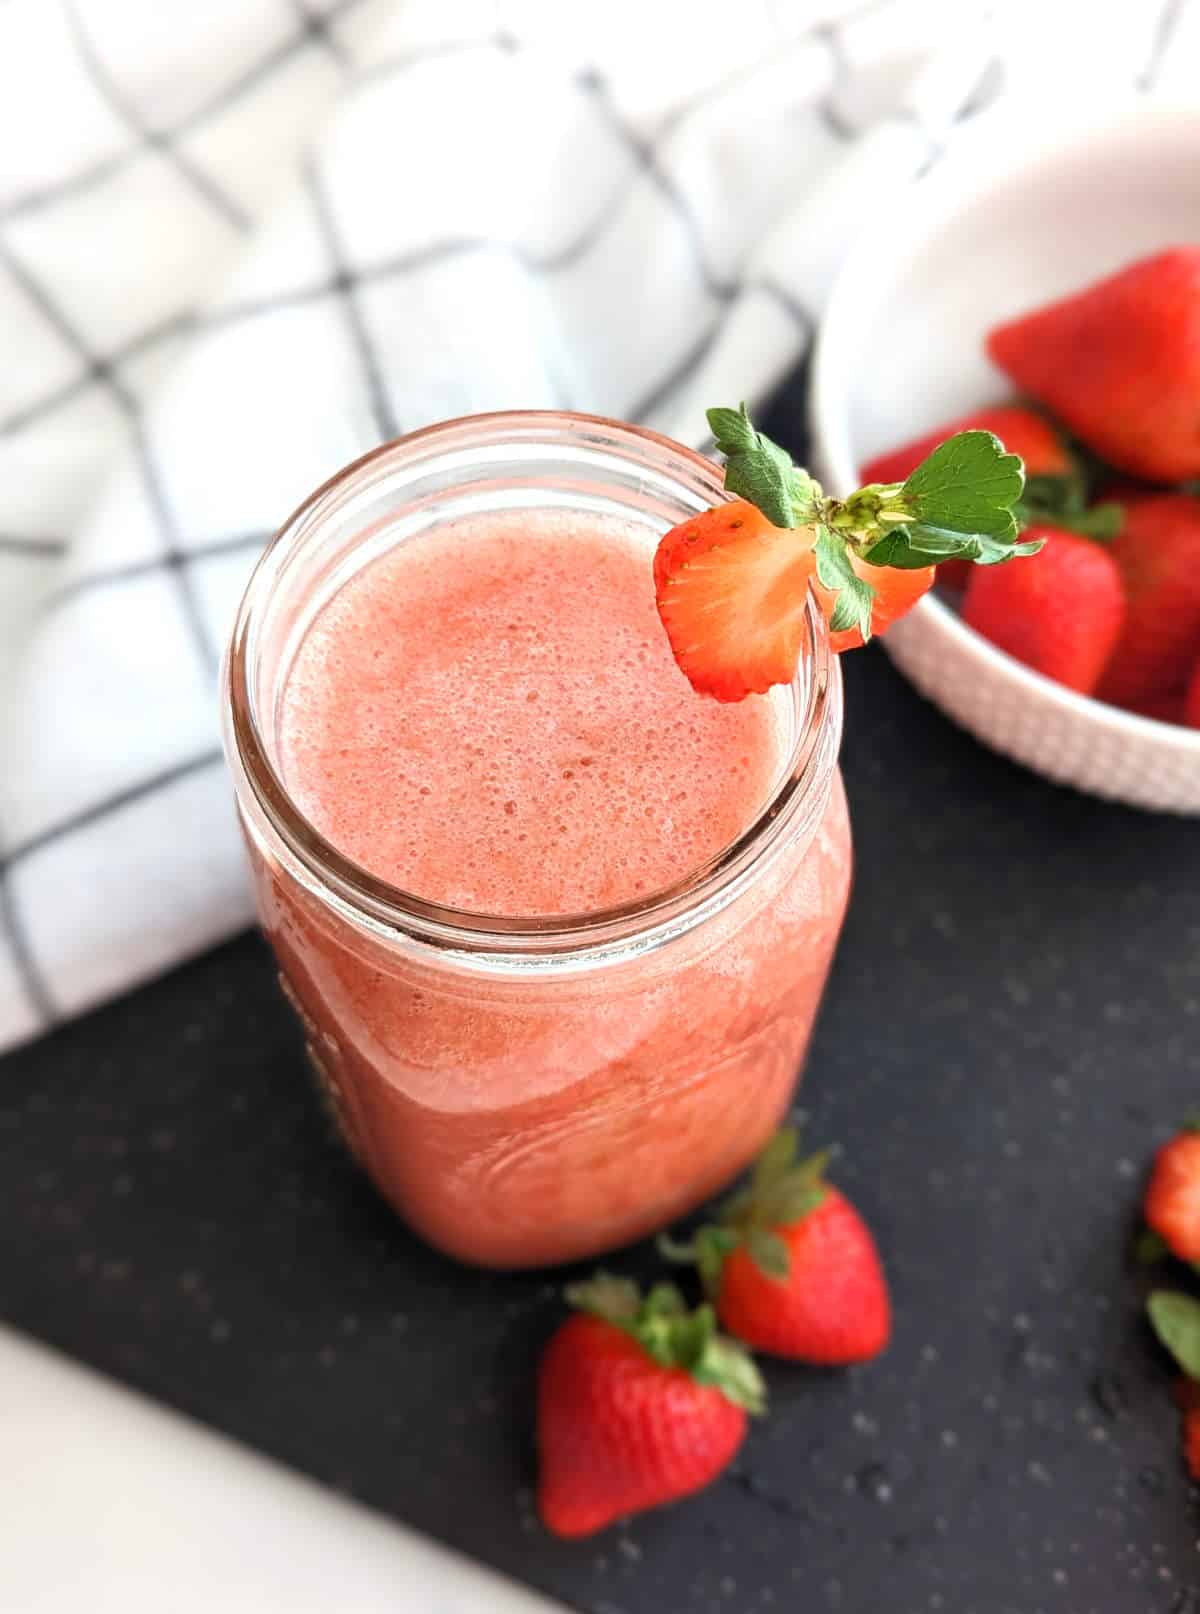 Strawberry juice in a mason jar with a slice of strawberry on the lip of the jar.